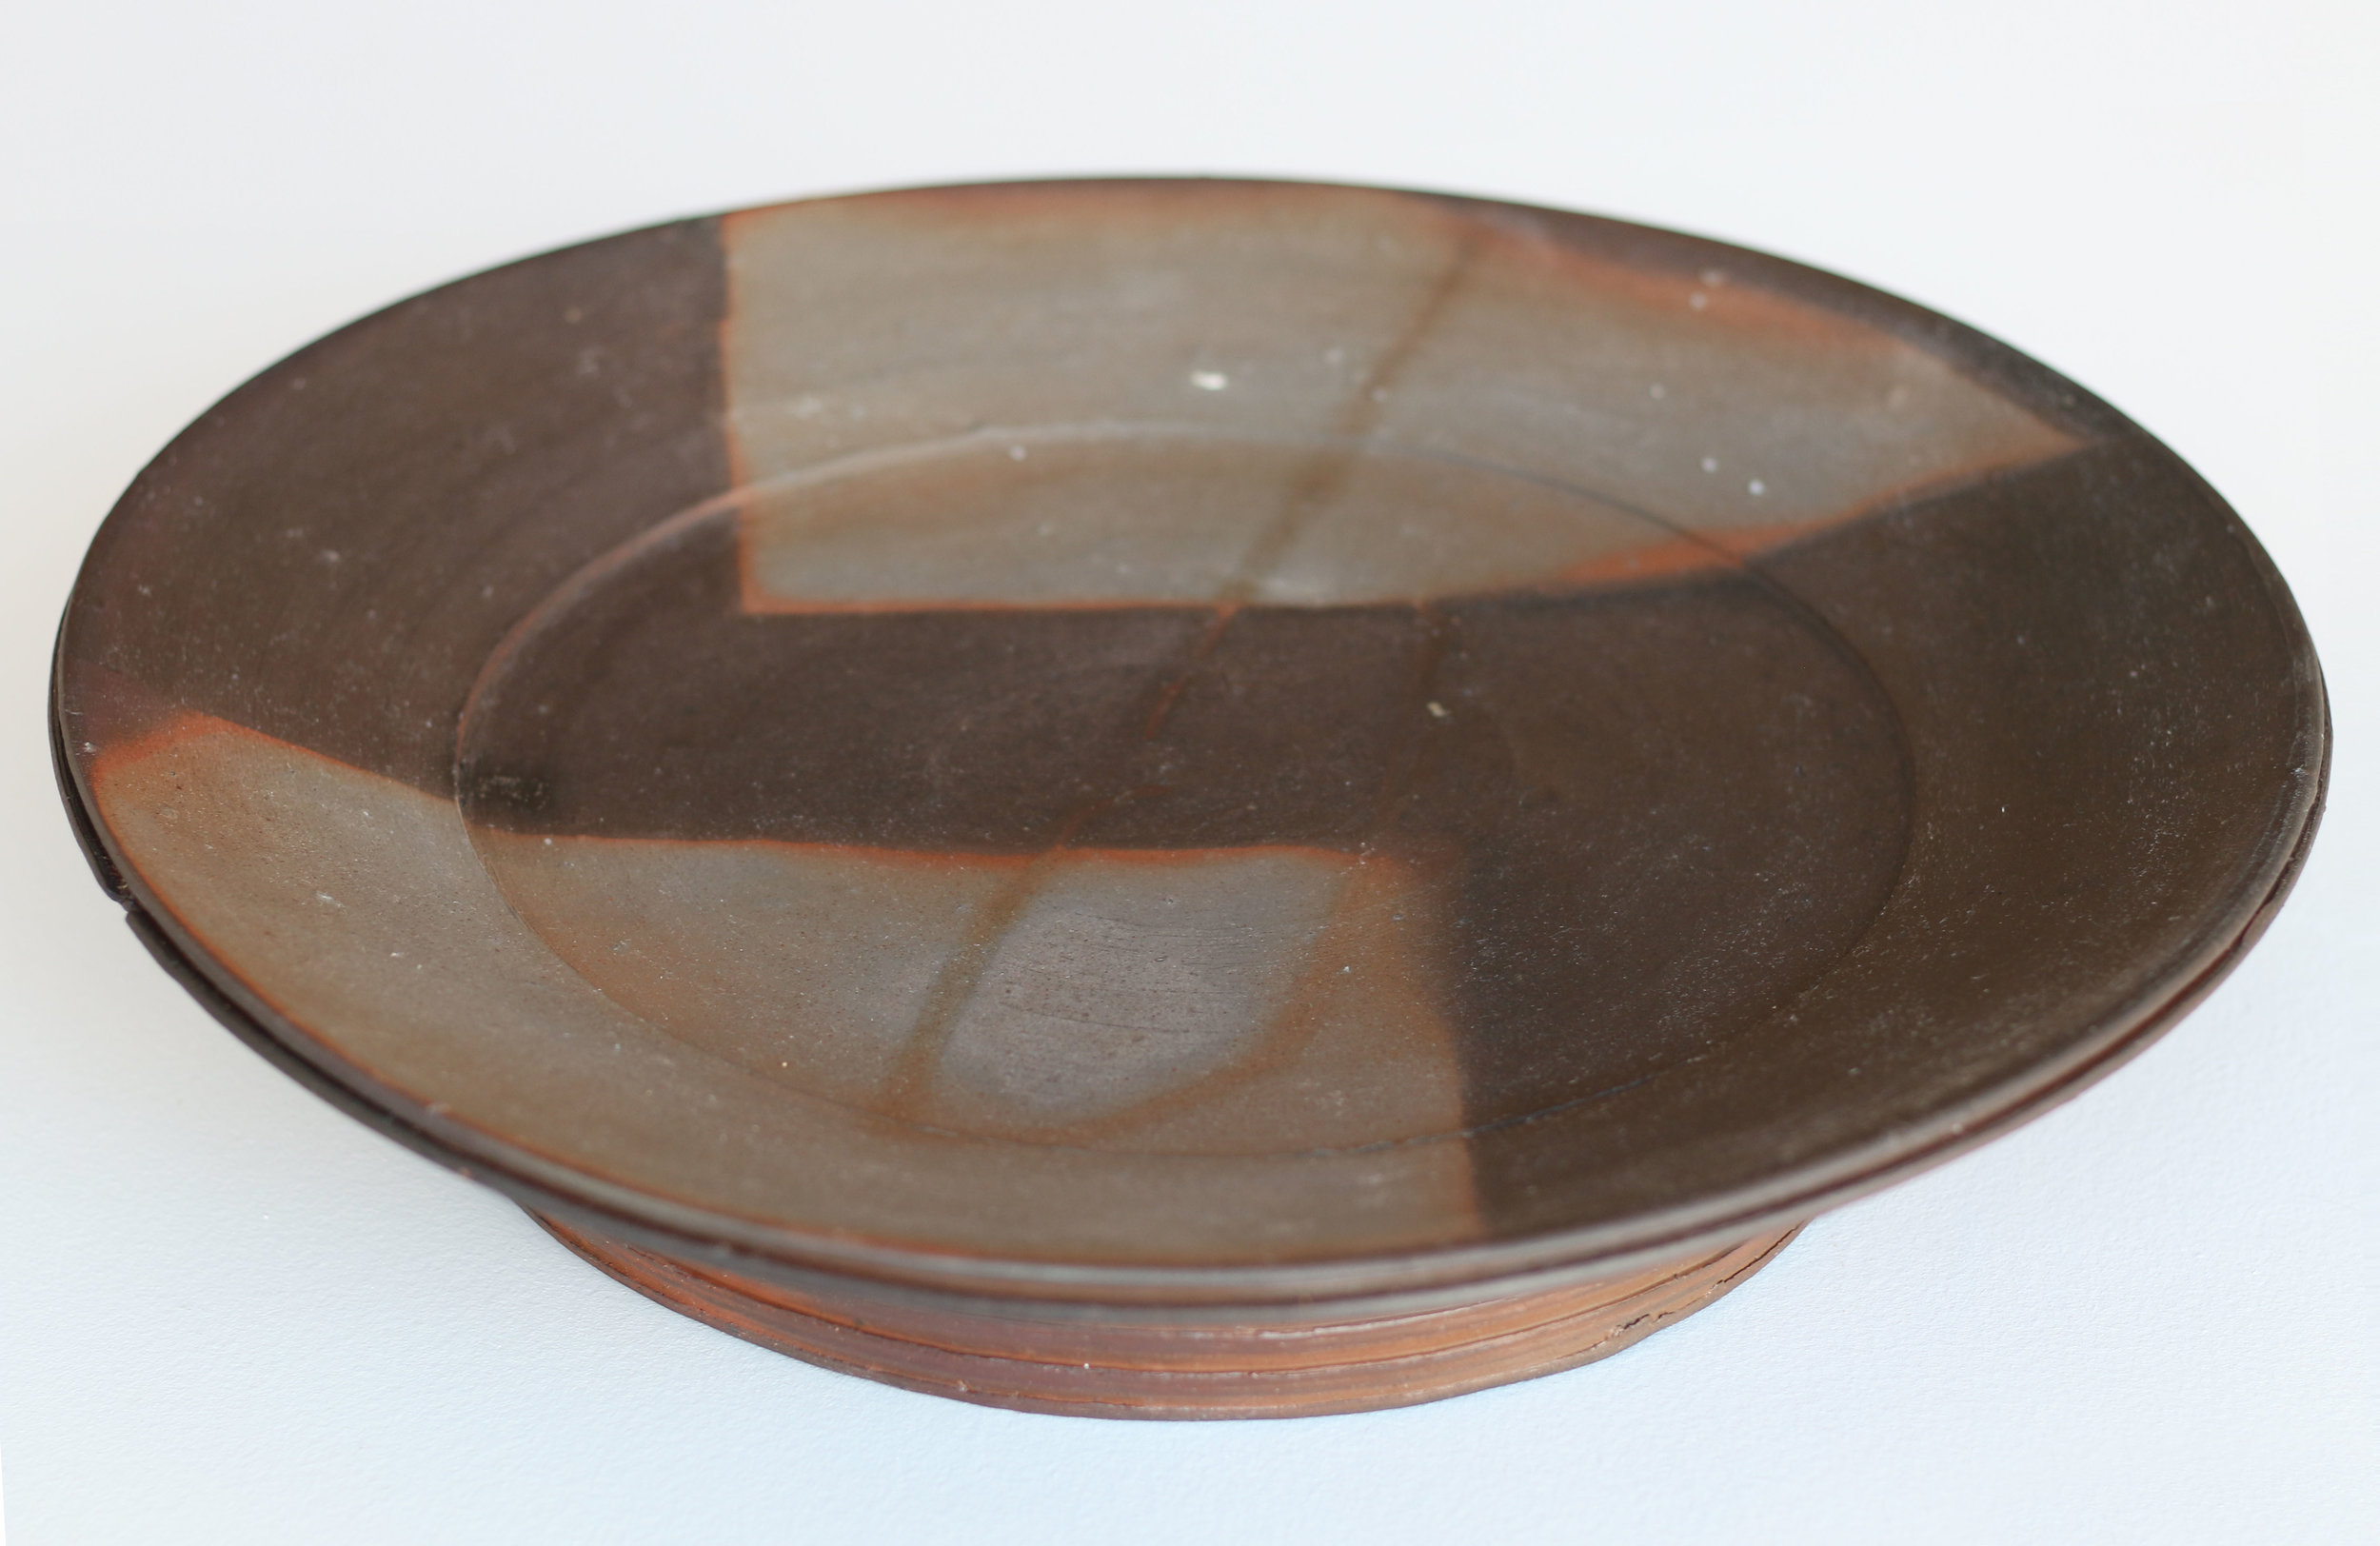 Platter with Elevated Foot with Incised Lines (Graphic shapes)